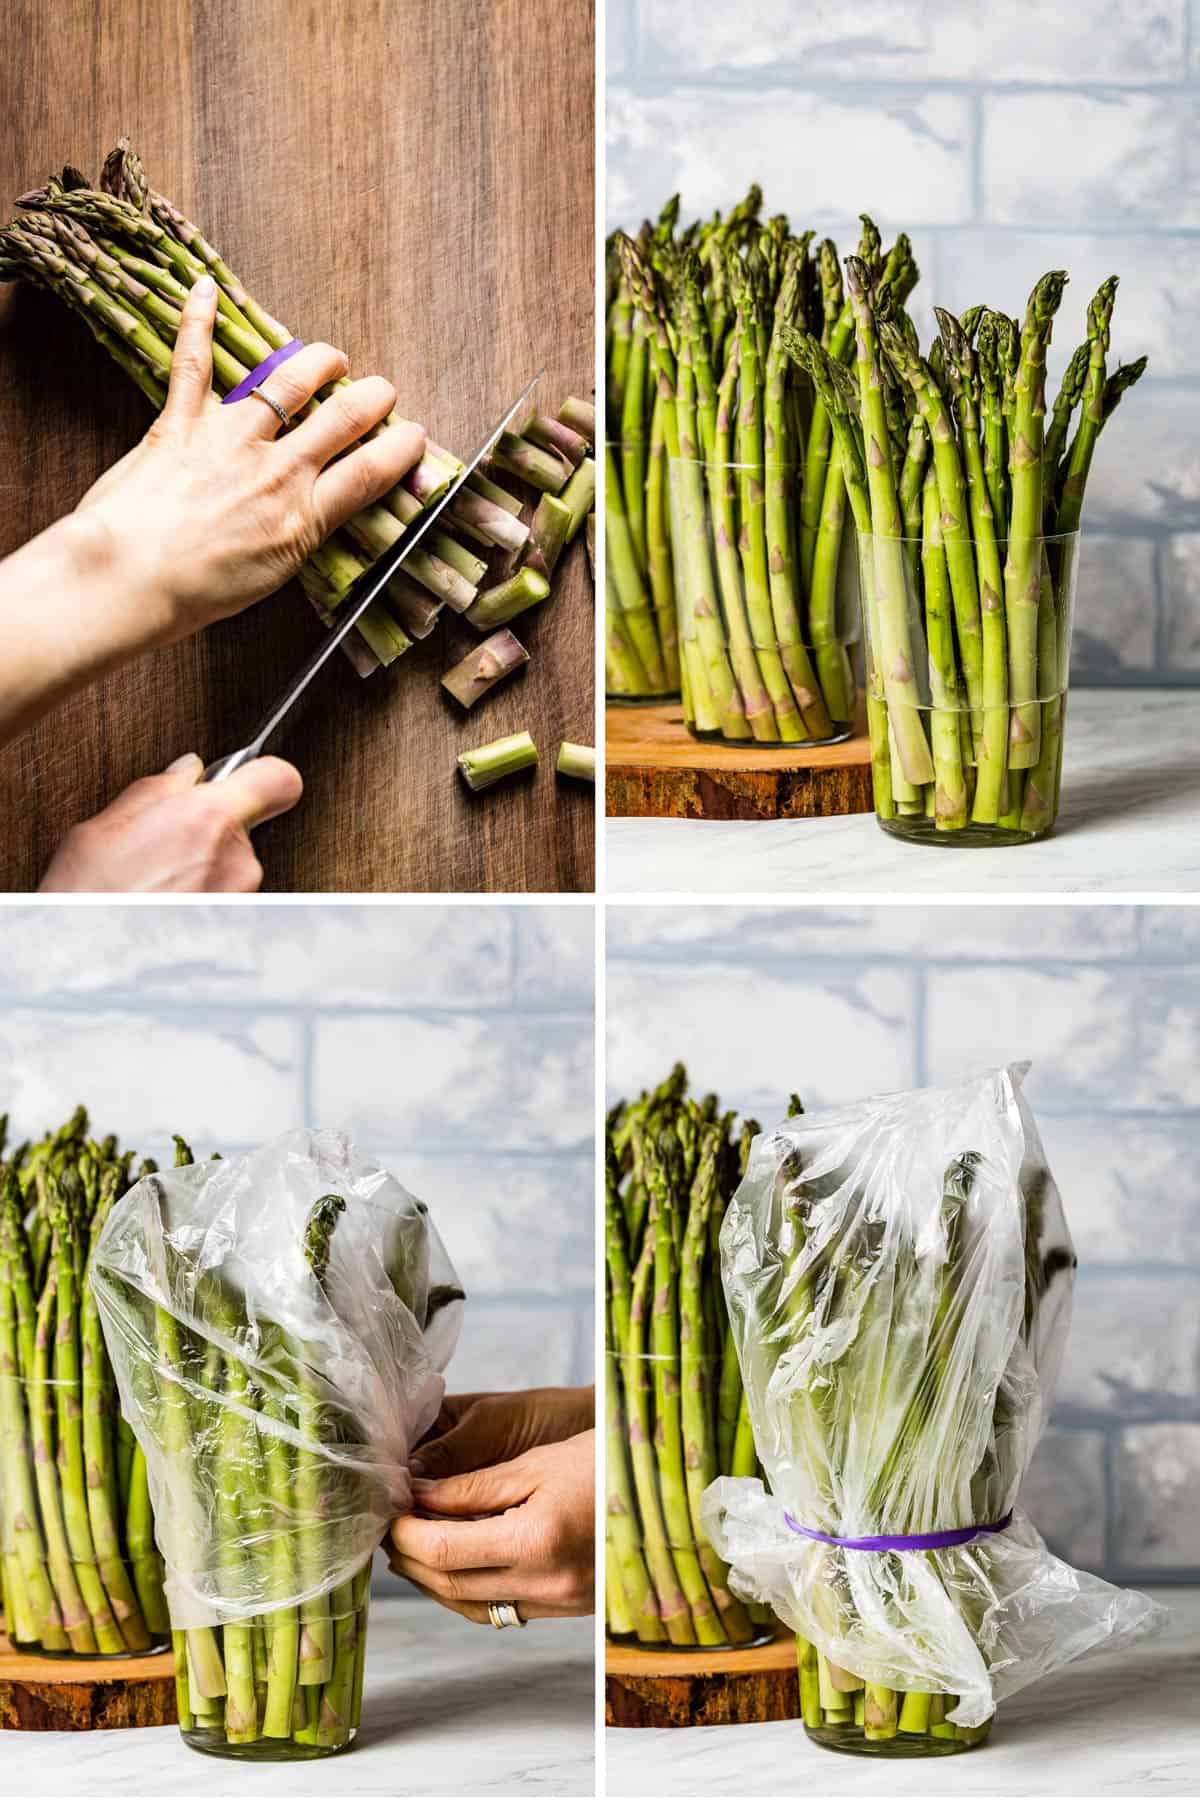 Photos showing how to store asparagus to keep it fresh in the fridge